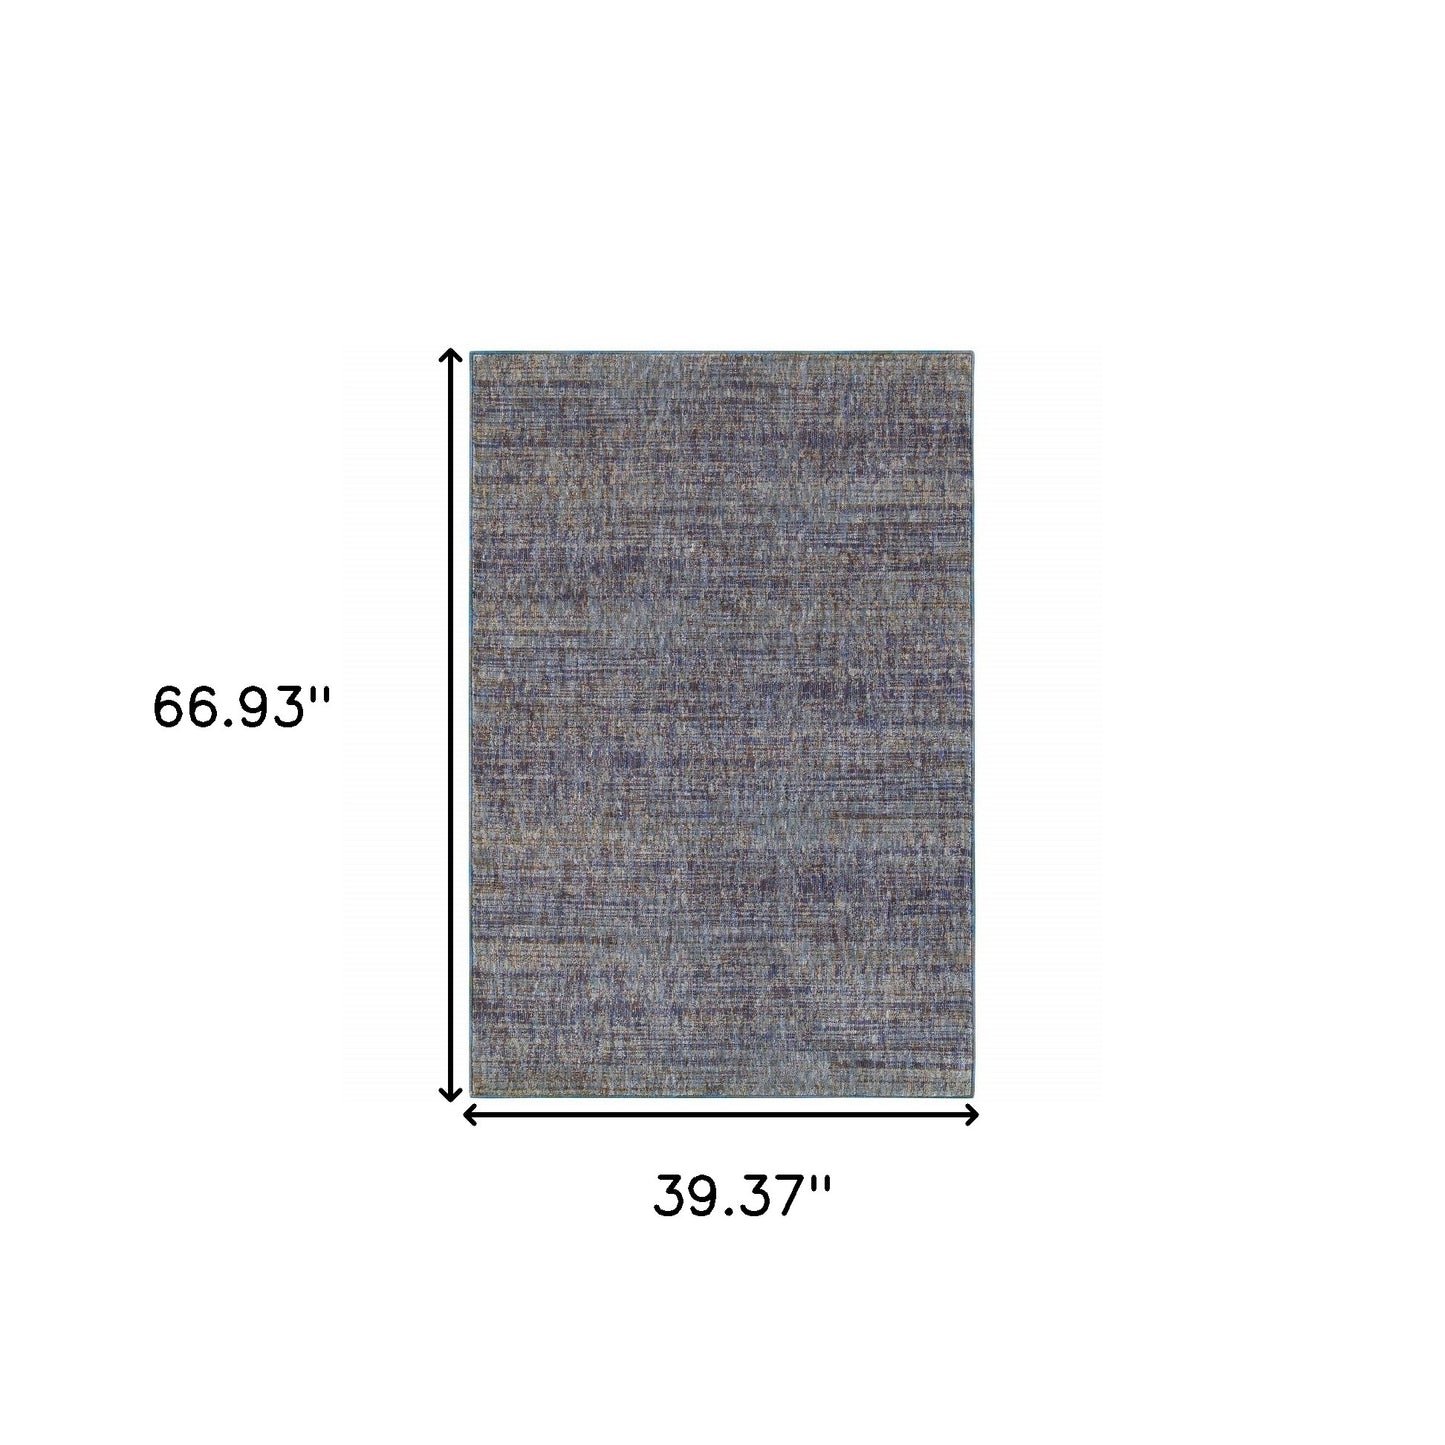 3' X 5' Blue and Ivory Power Loom Area Rug